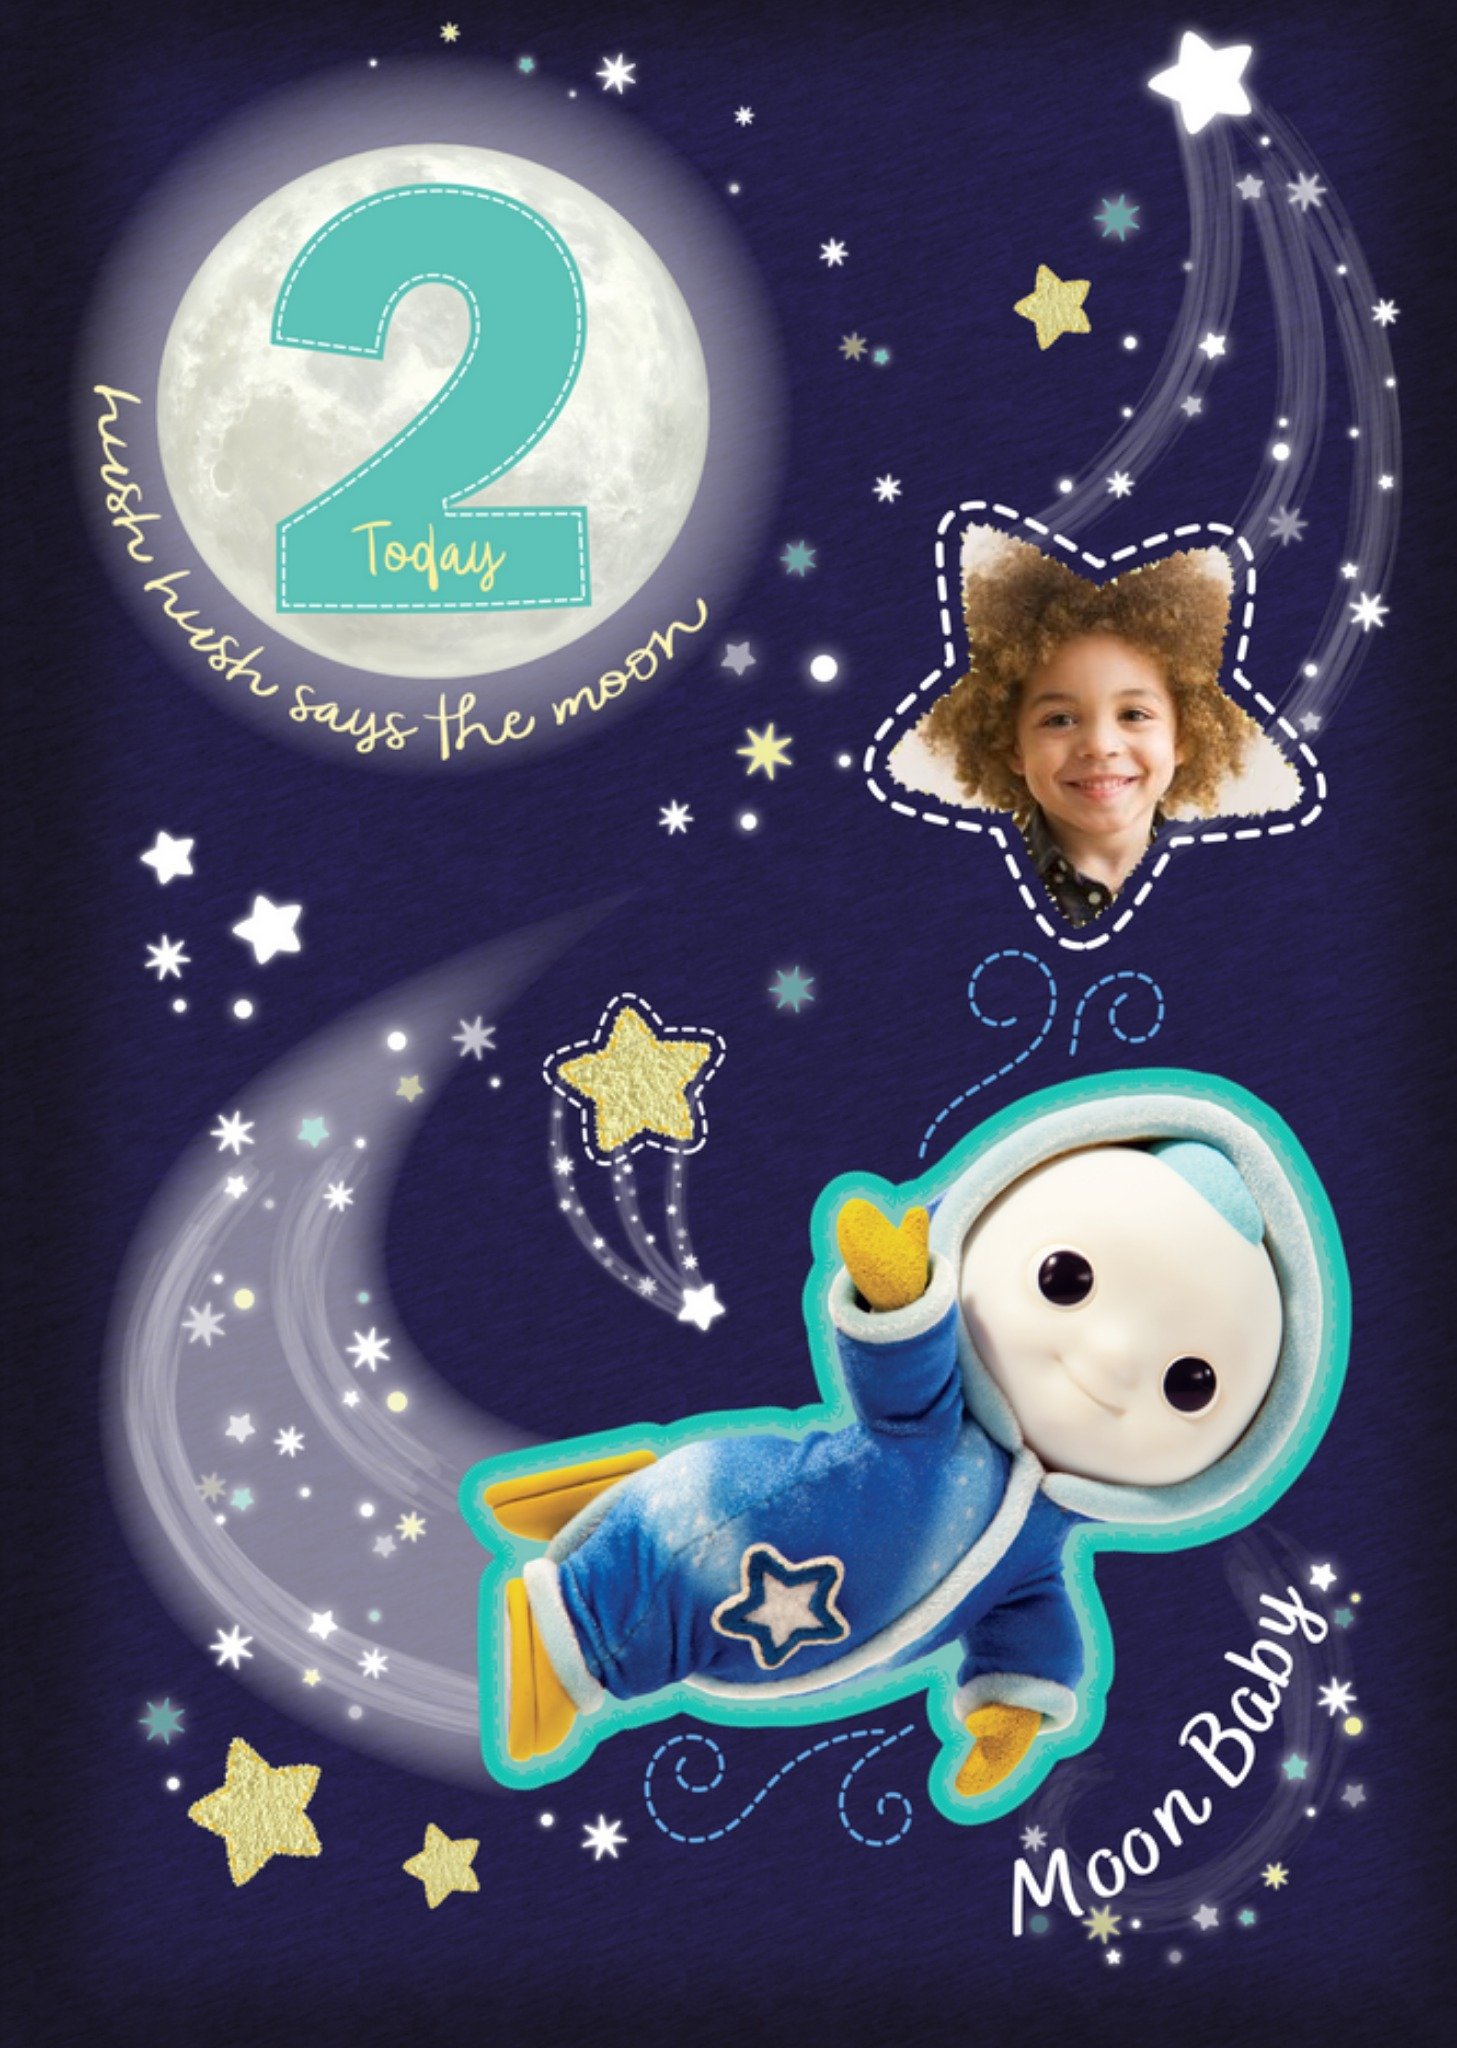 Other Moon And Me 2 Today Moon Baby Photo Upload Birthday Card Ecard